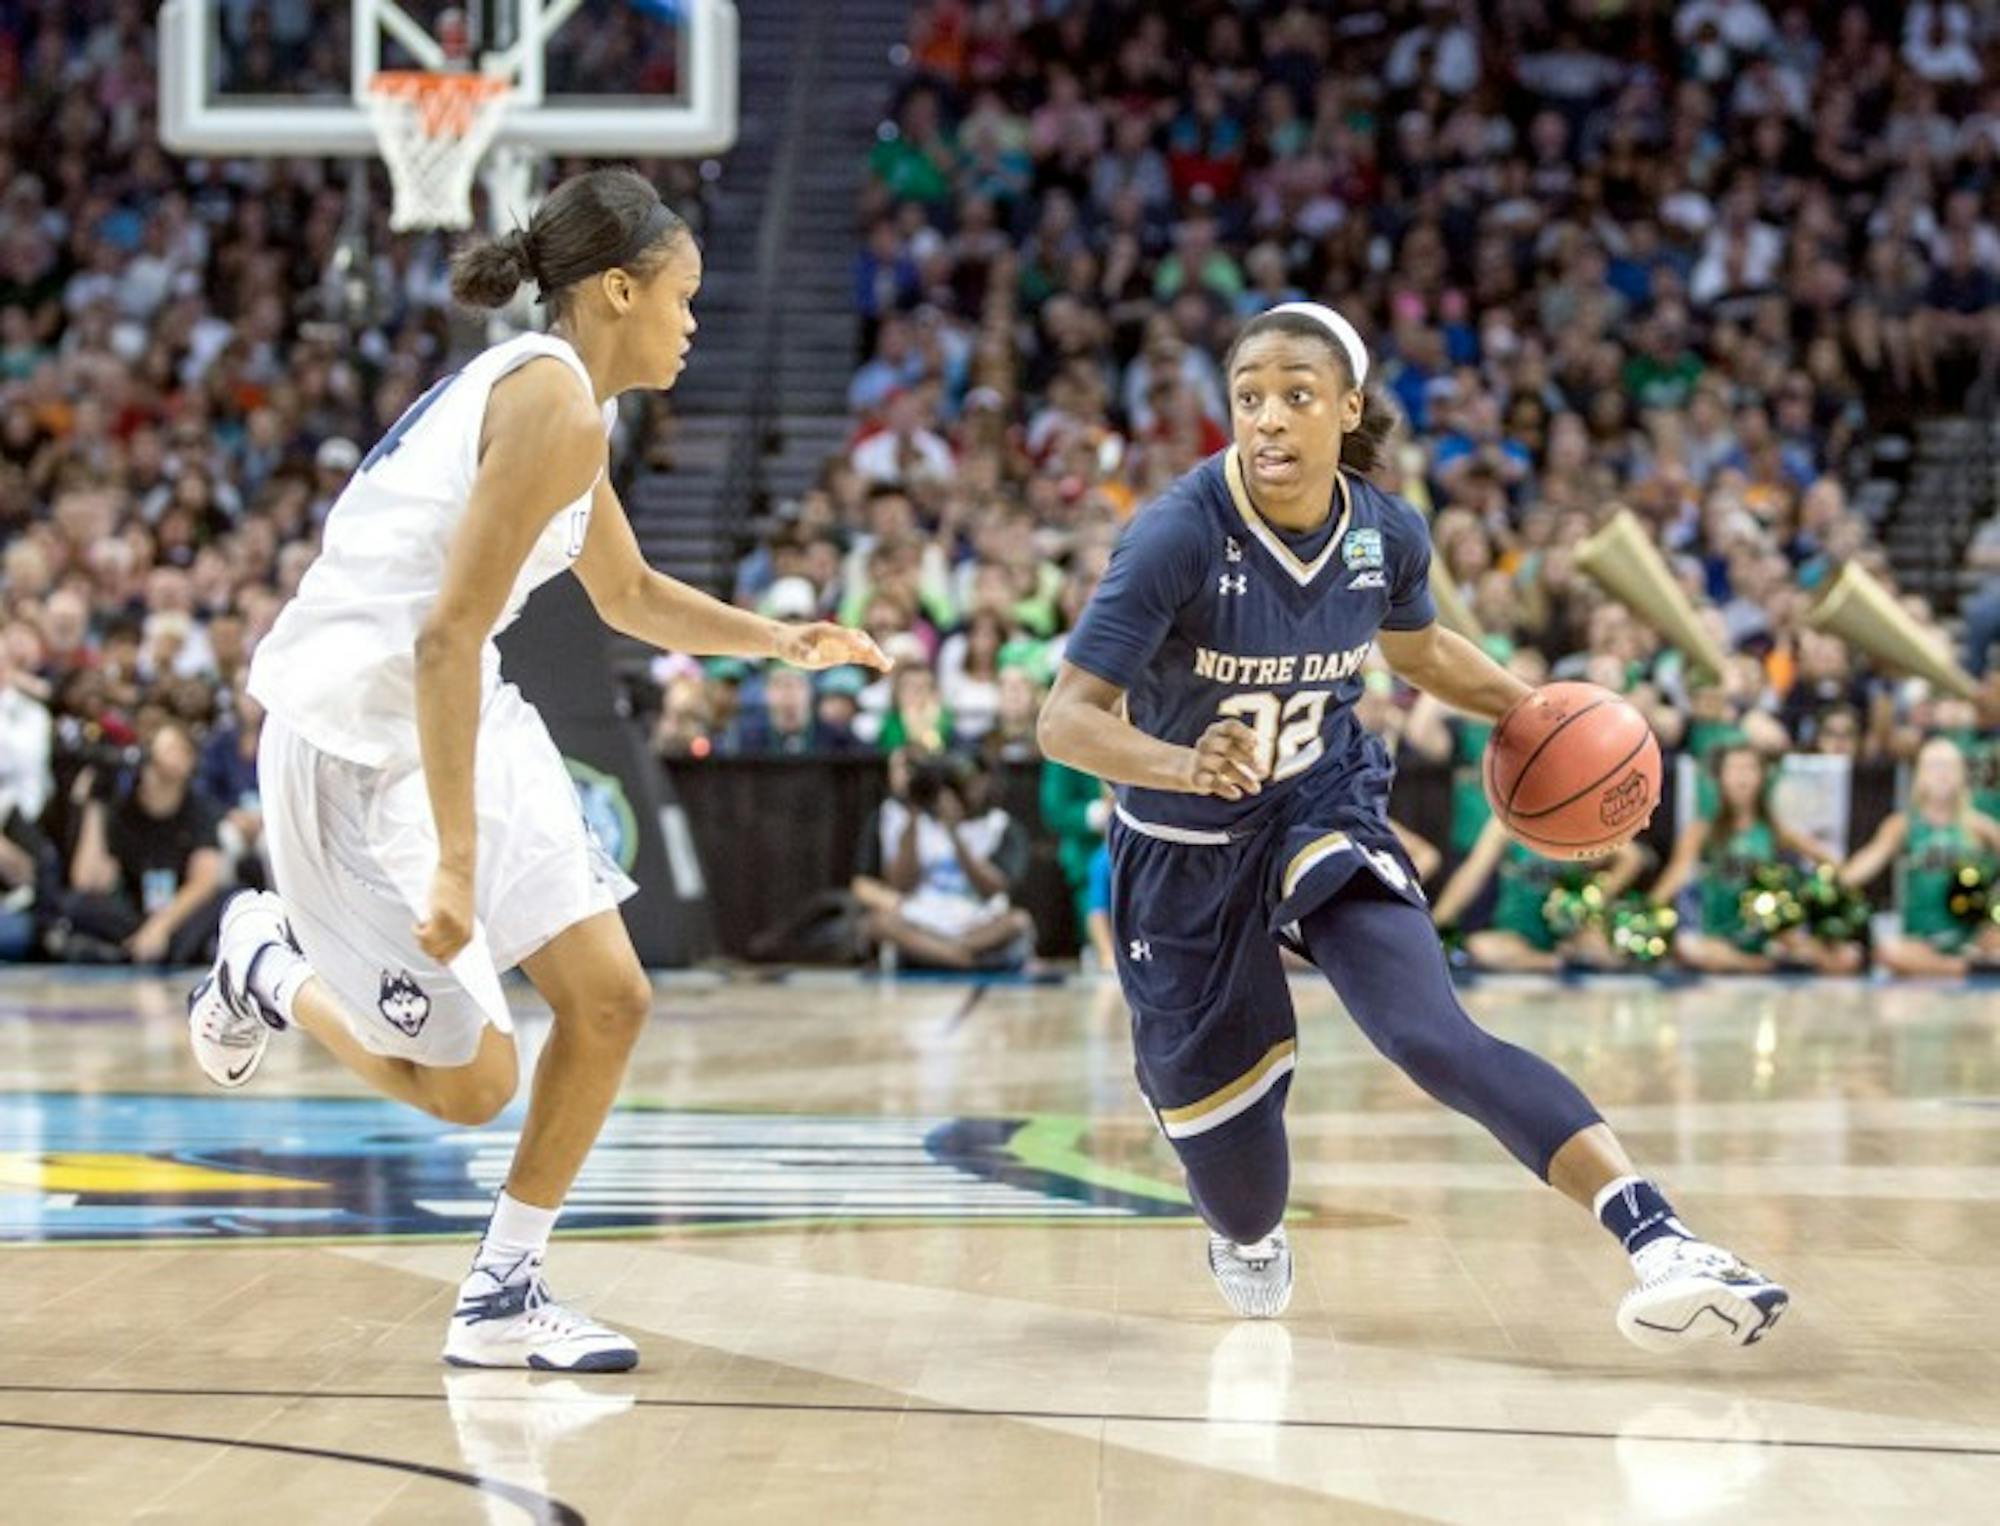 Irish junior guard Jewell Loyd drives against Connecticut junior guard Moriah Jefferson during Notre Dame’s 63-53 loss in the national championship. Loyd finished the game with 12 points and five rebounds.